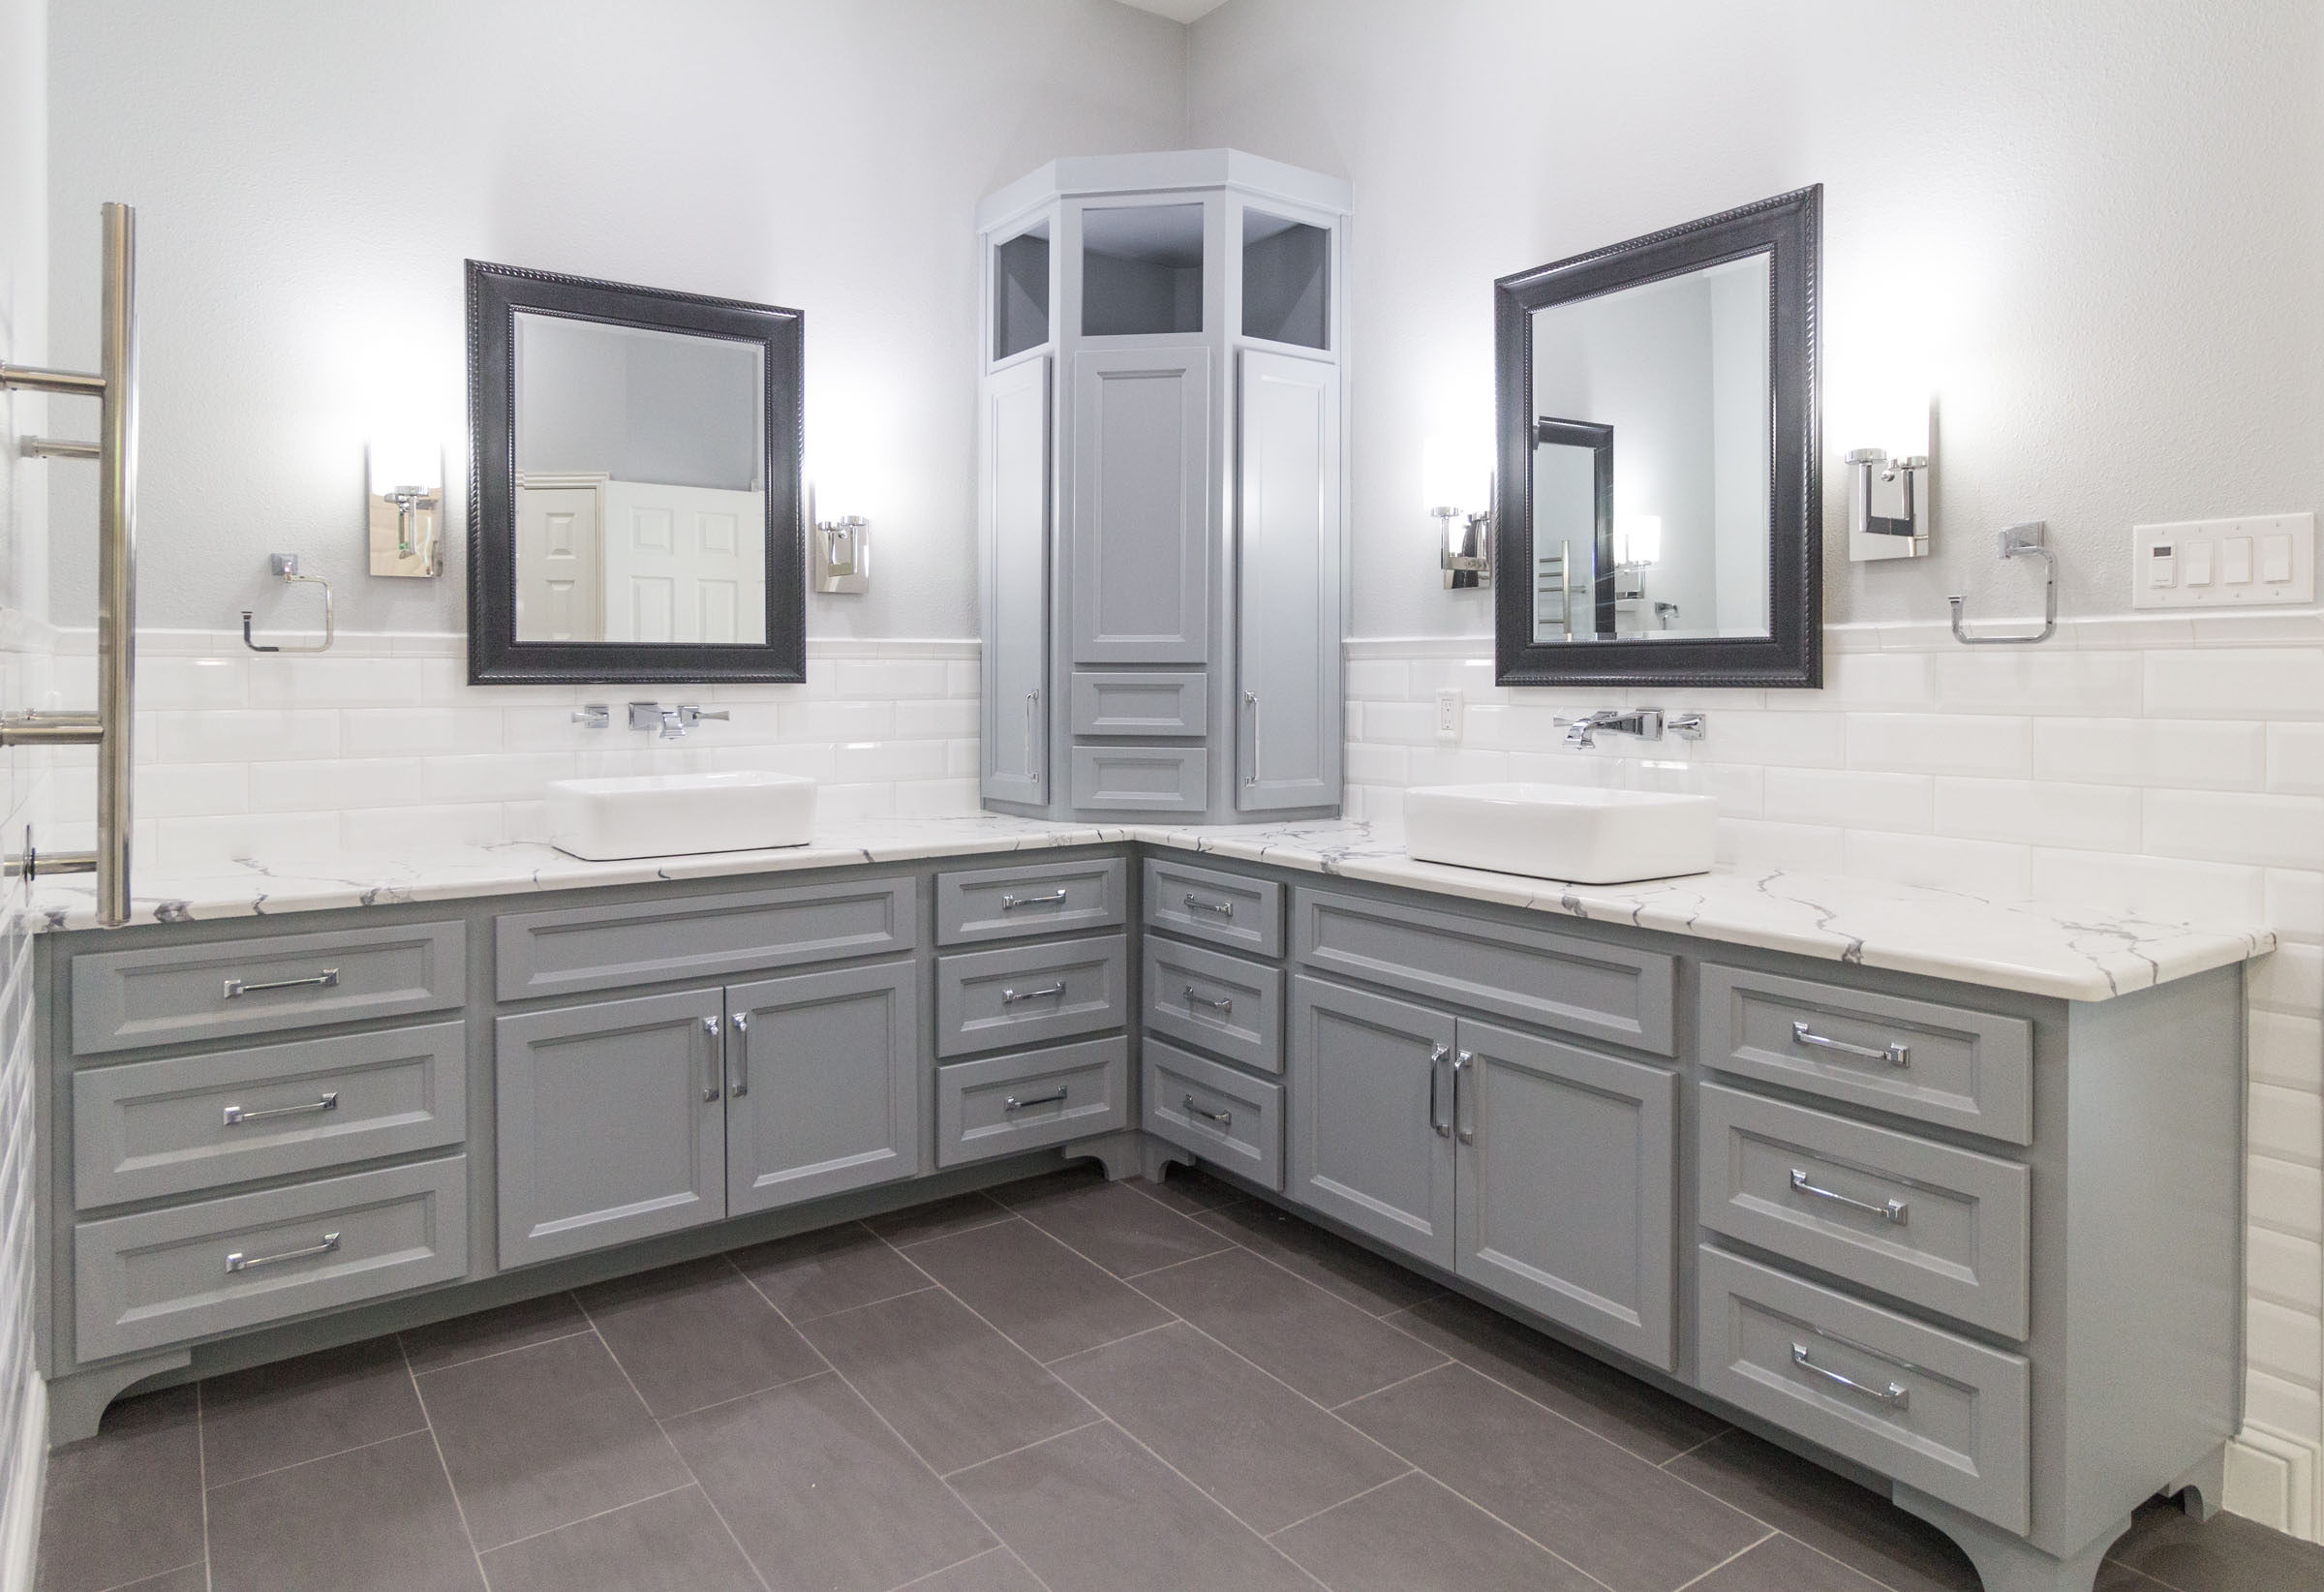 Contemporary bathroom remodel, chrome hardware, white subway tile, grey cabinets, granite countertops, black trimmed mirrors